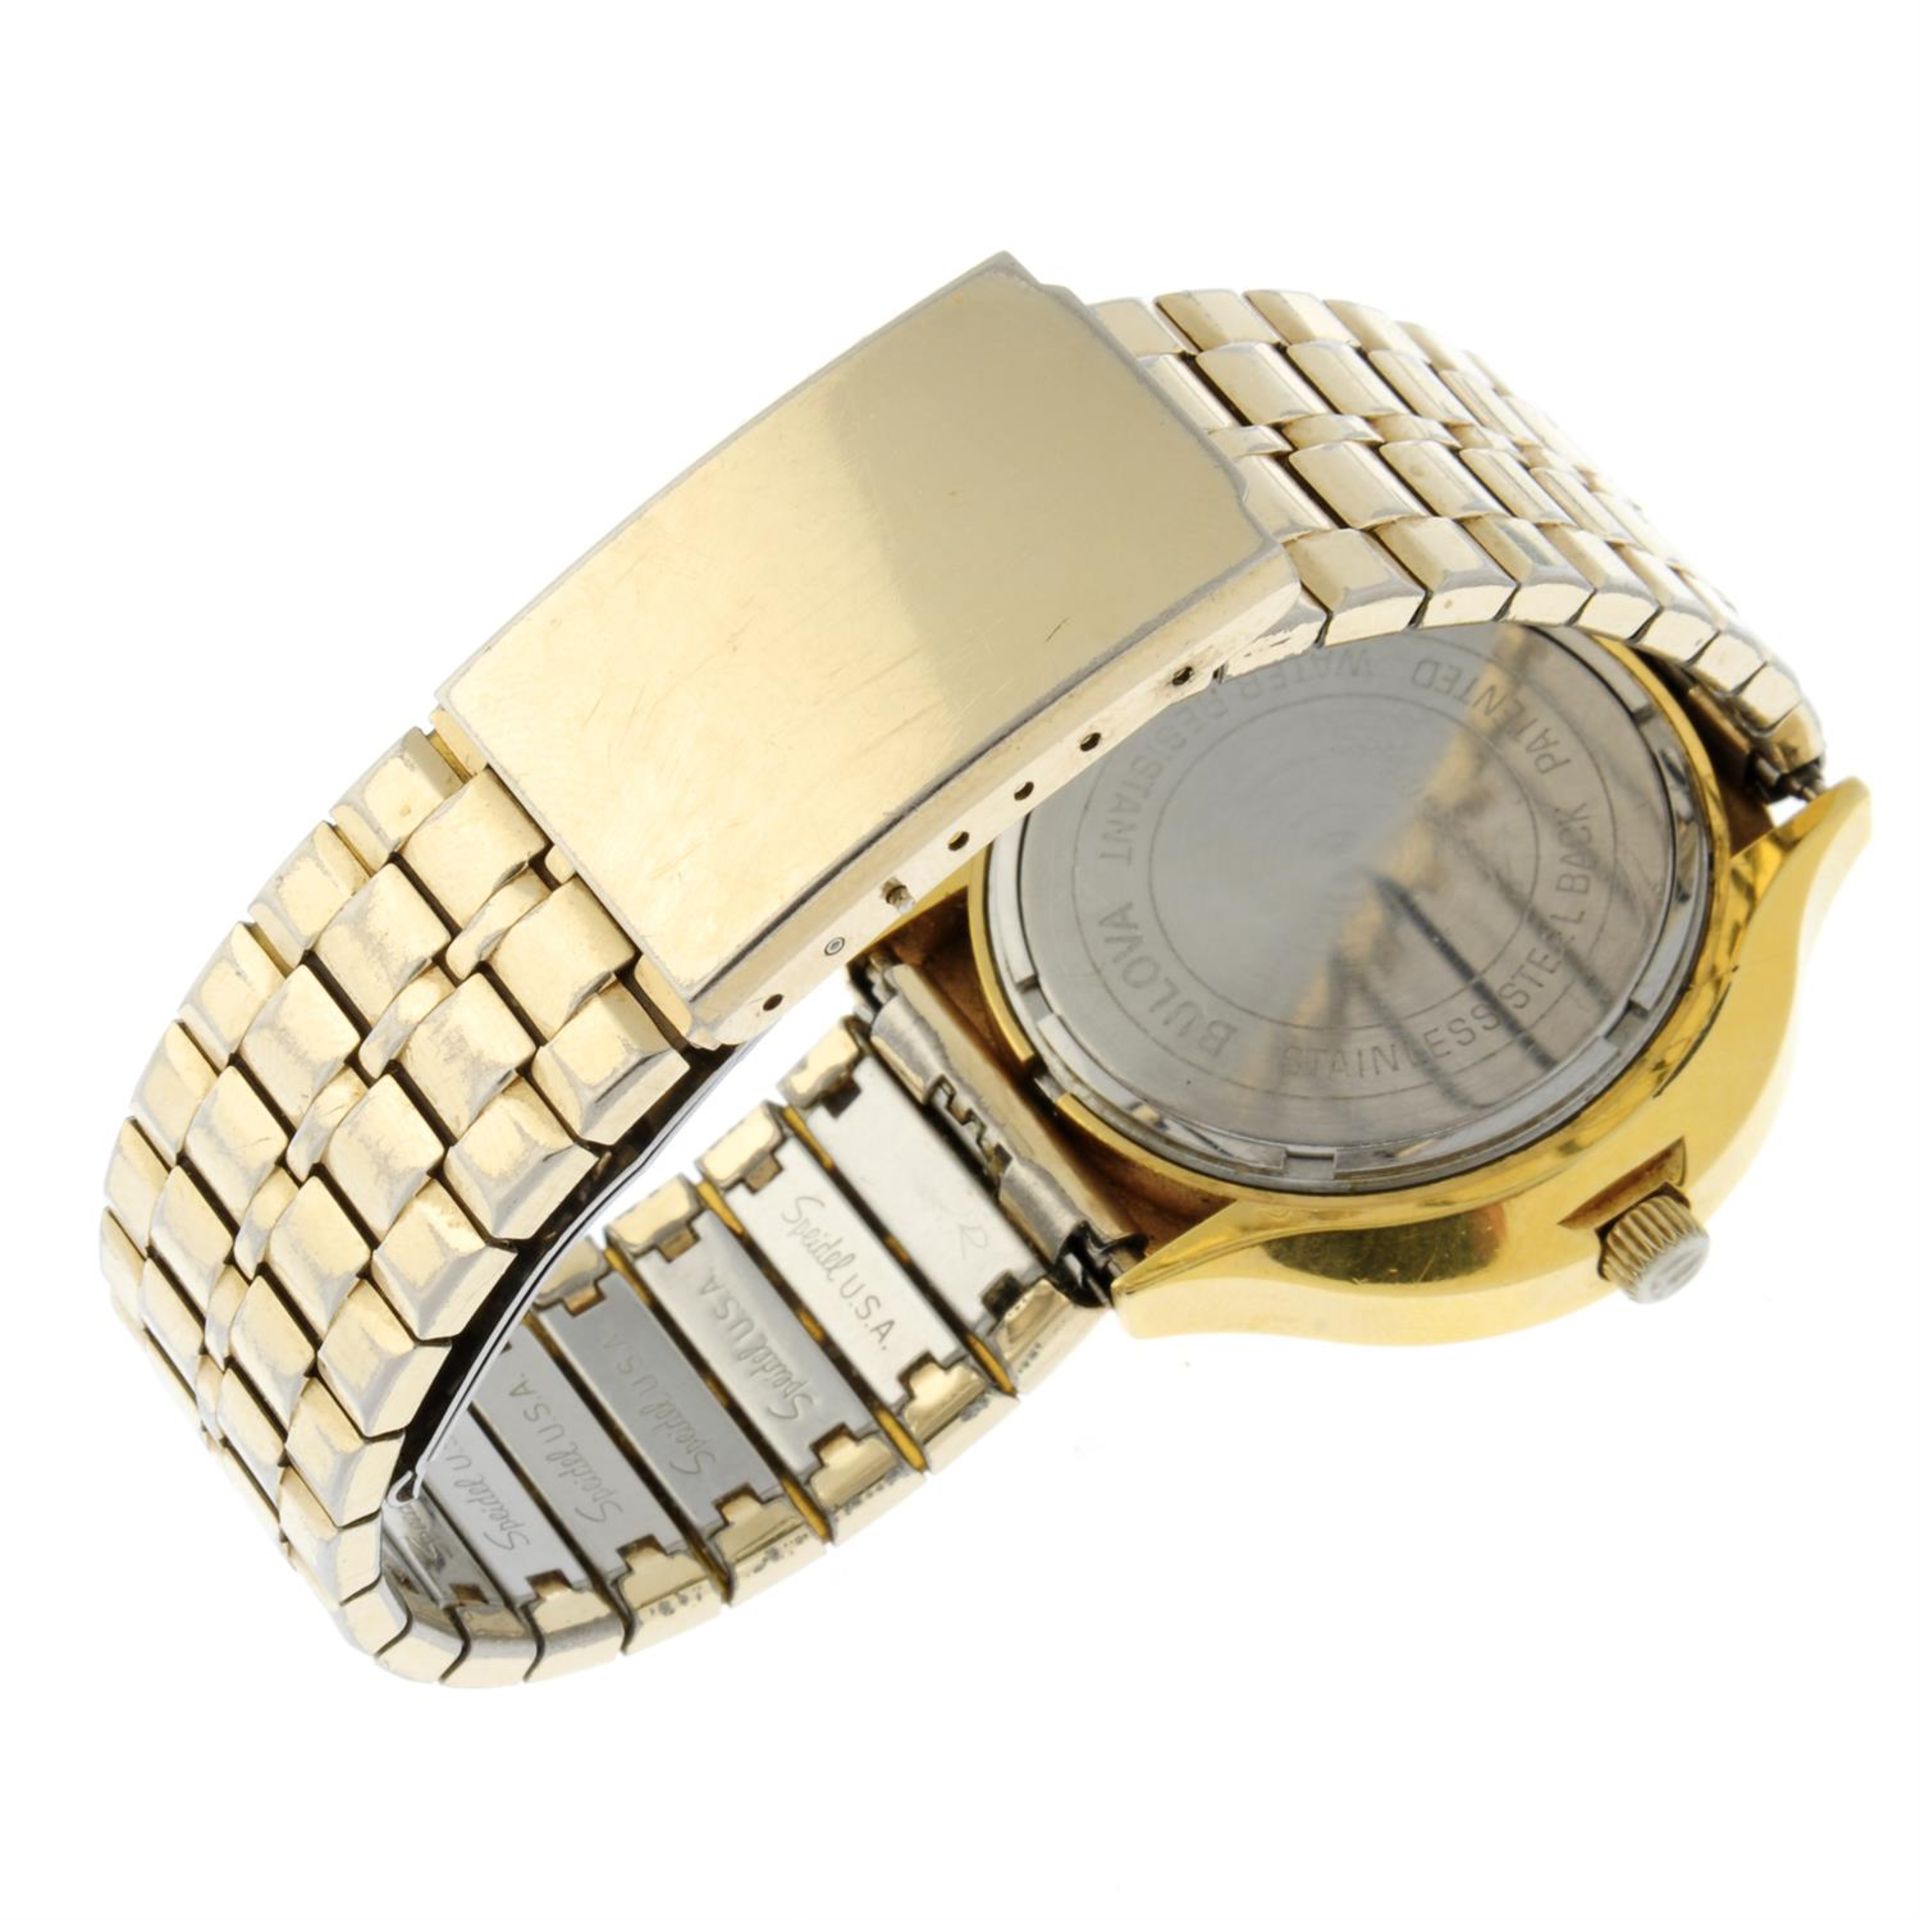 BULOVA - a gold plated Accutron bracelet watch, 42x37mm. - Image 2 of 4